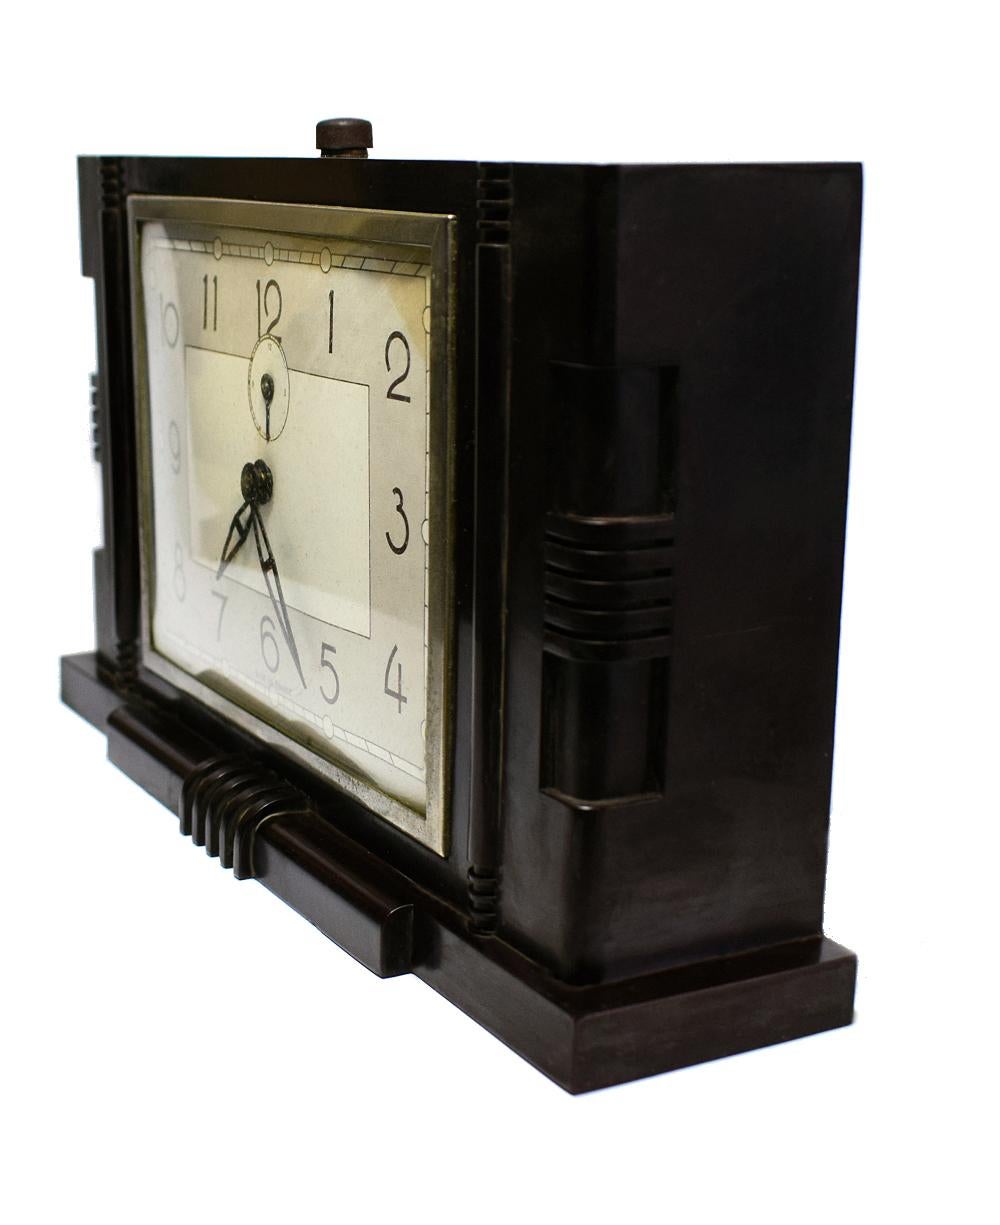 Impressive 1930s Art Deco Bakelite table or mantel clock. Great geometric bakelite case . As with all of our clocks this is in full working order. Condition is good with no damage to note.